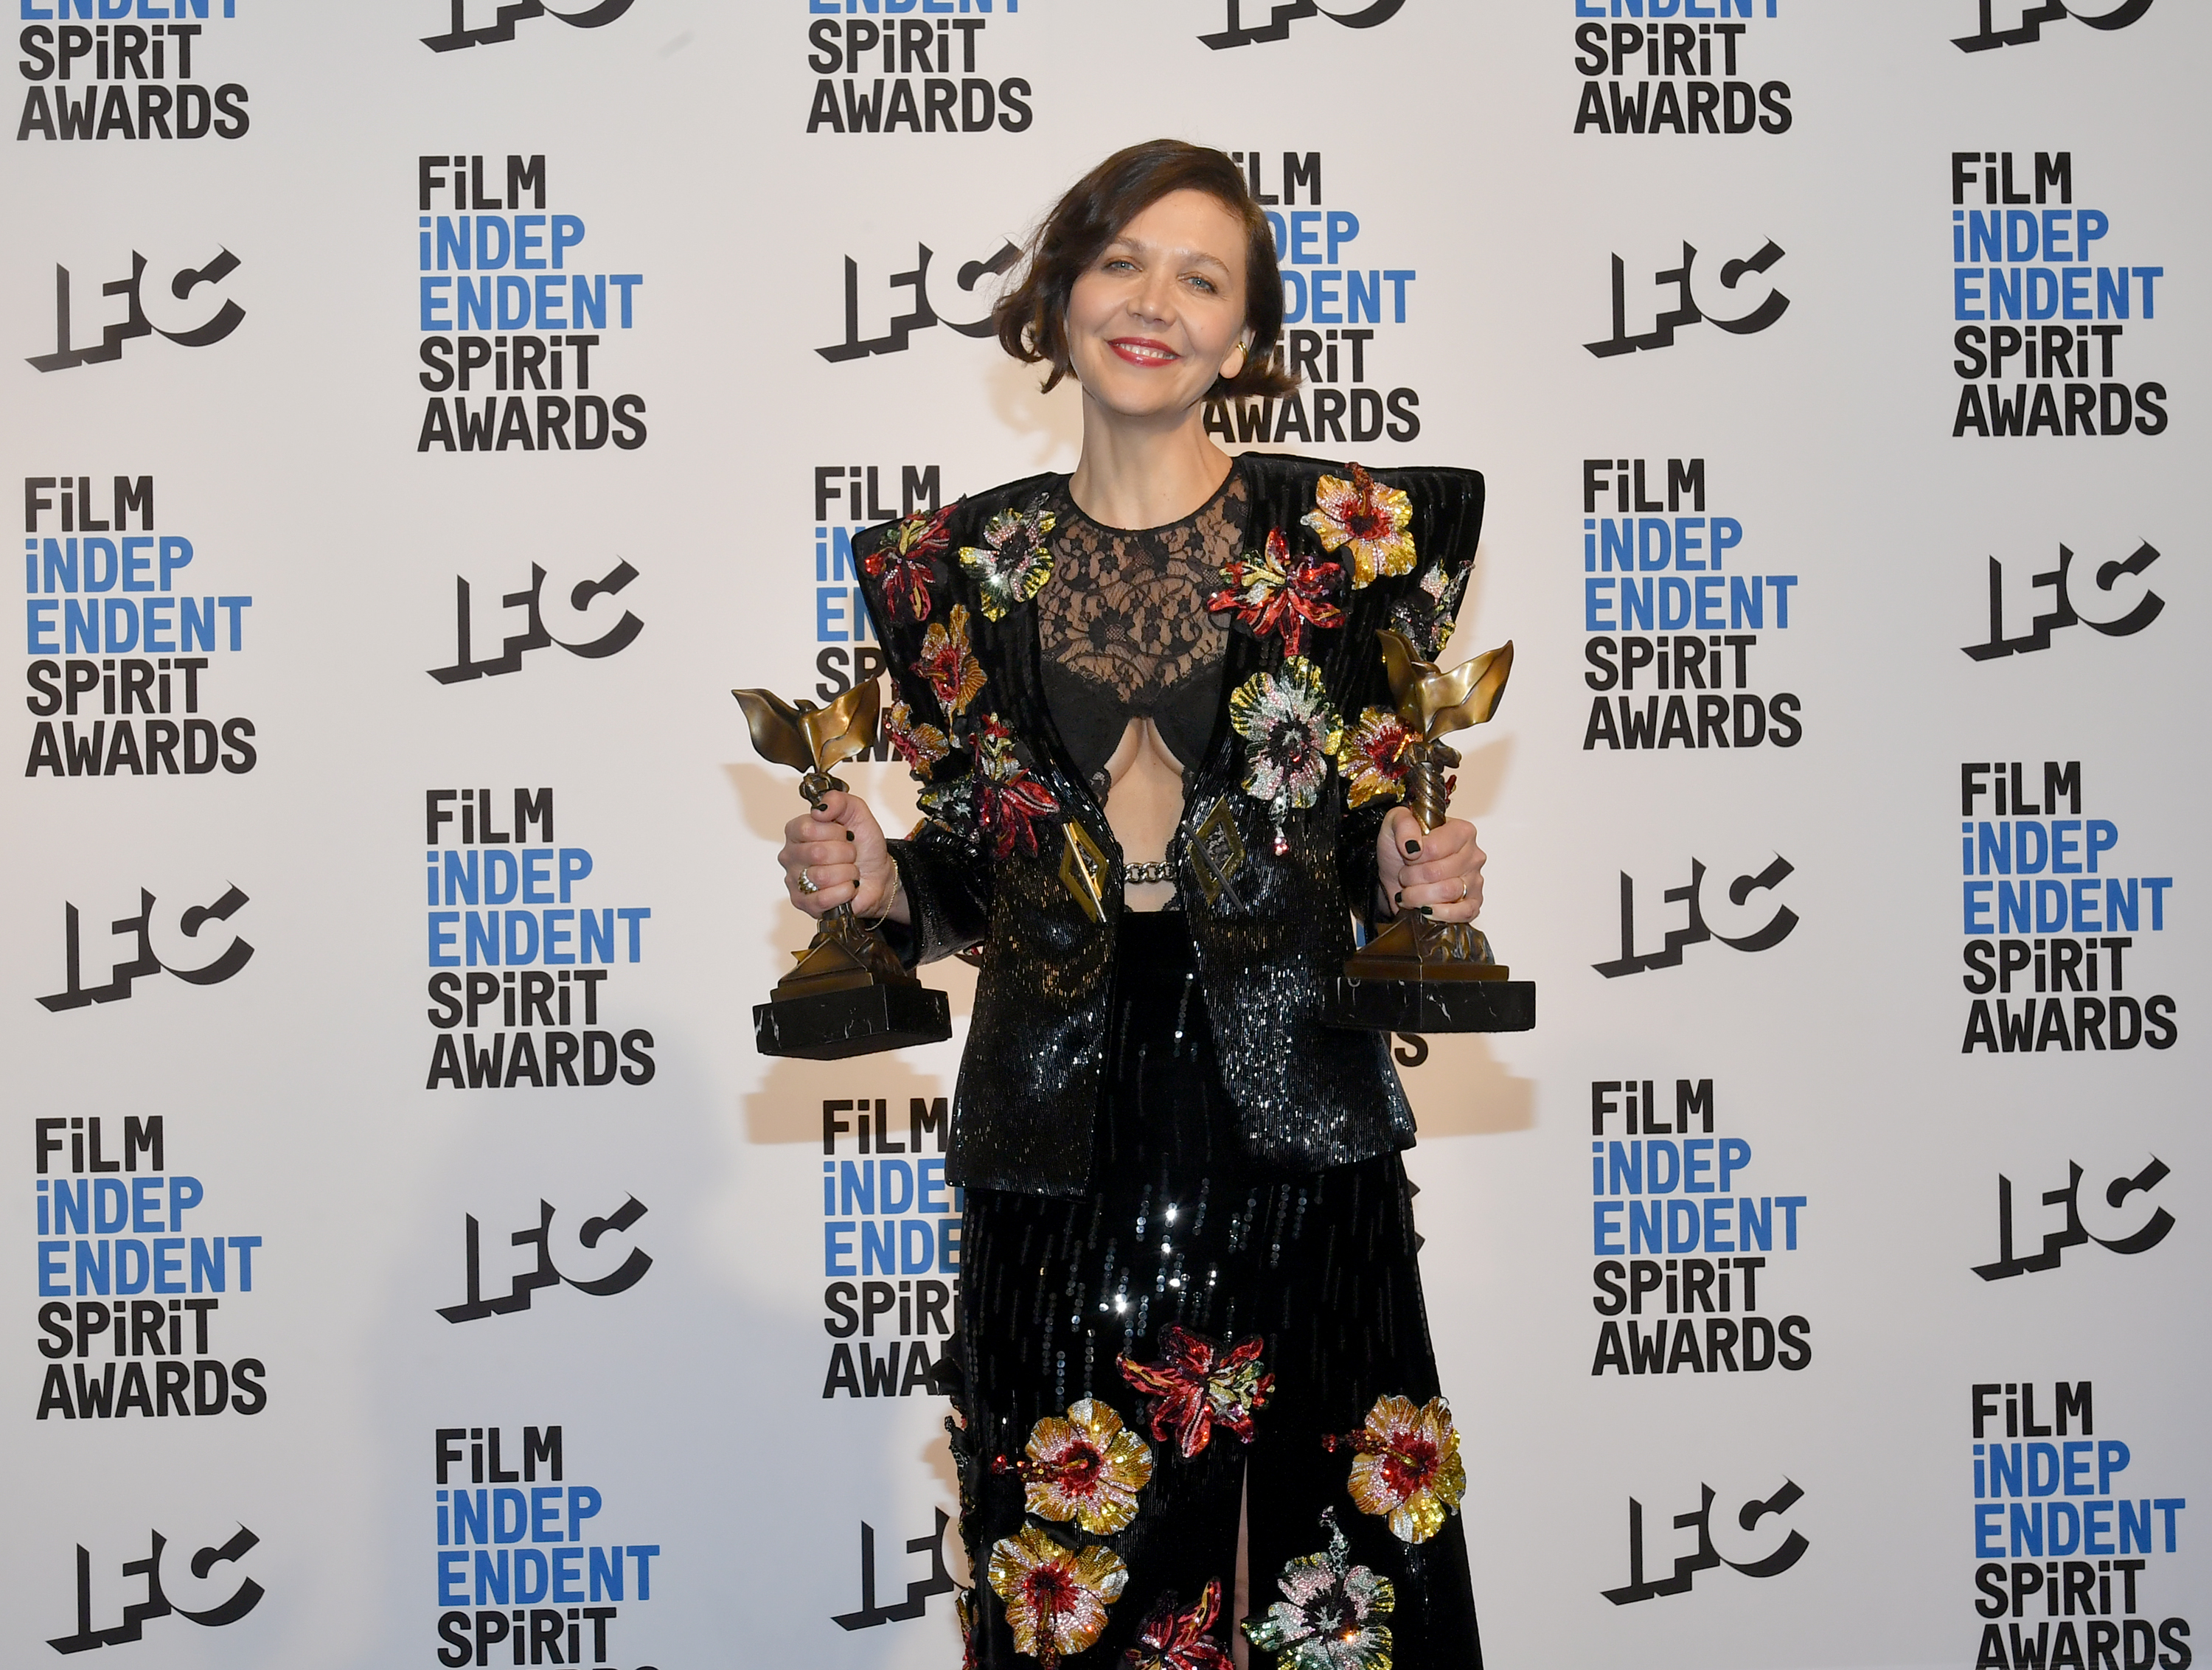 Maggie Gyllenhaal, winner of the Best Feature, Best Director, and Best Screenplay awards for The Lost Daughter at the 37th Annual Independent Spirit Awards held at Santa Monica Pier on March 6th, 2022 in Santa Monica, California.